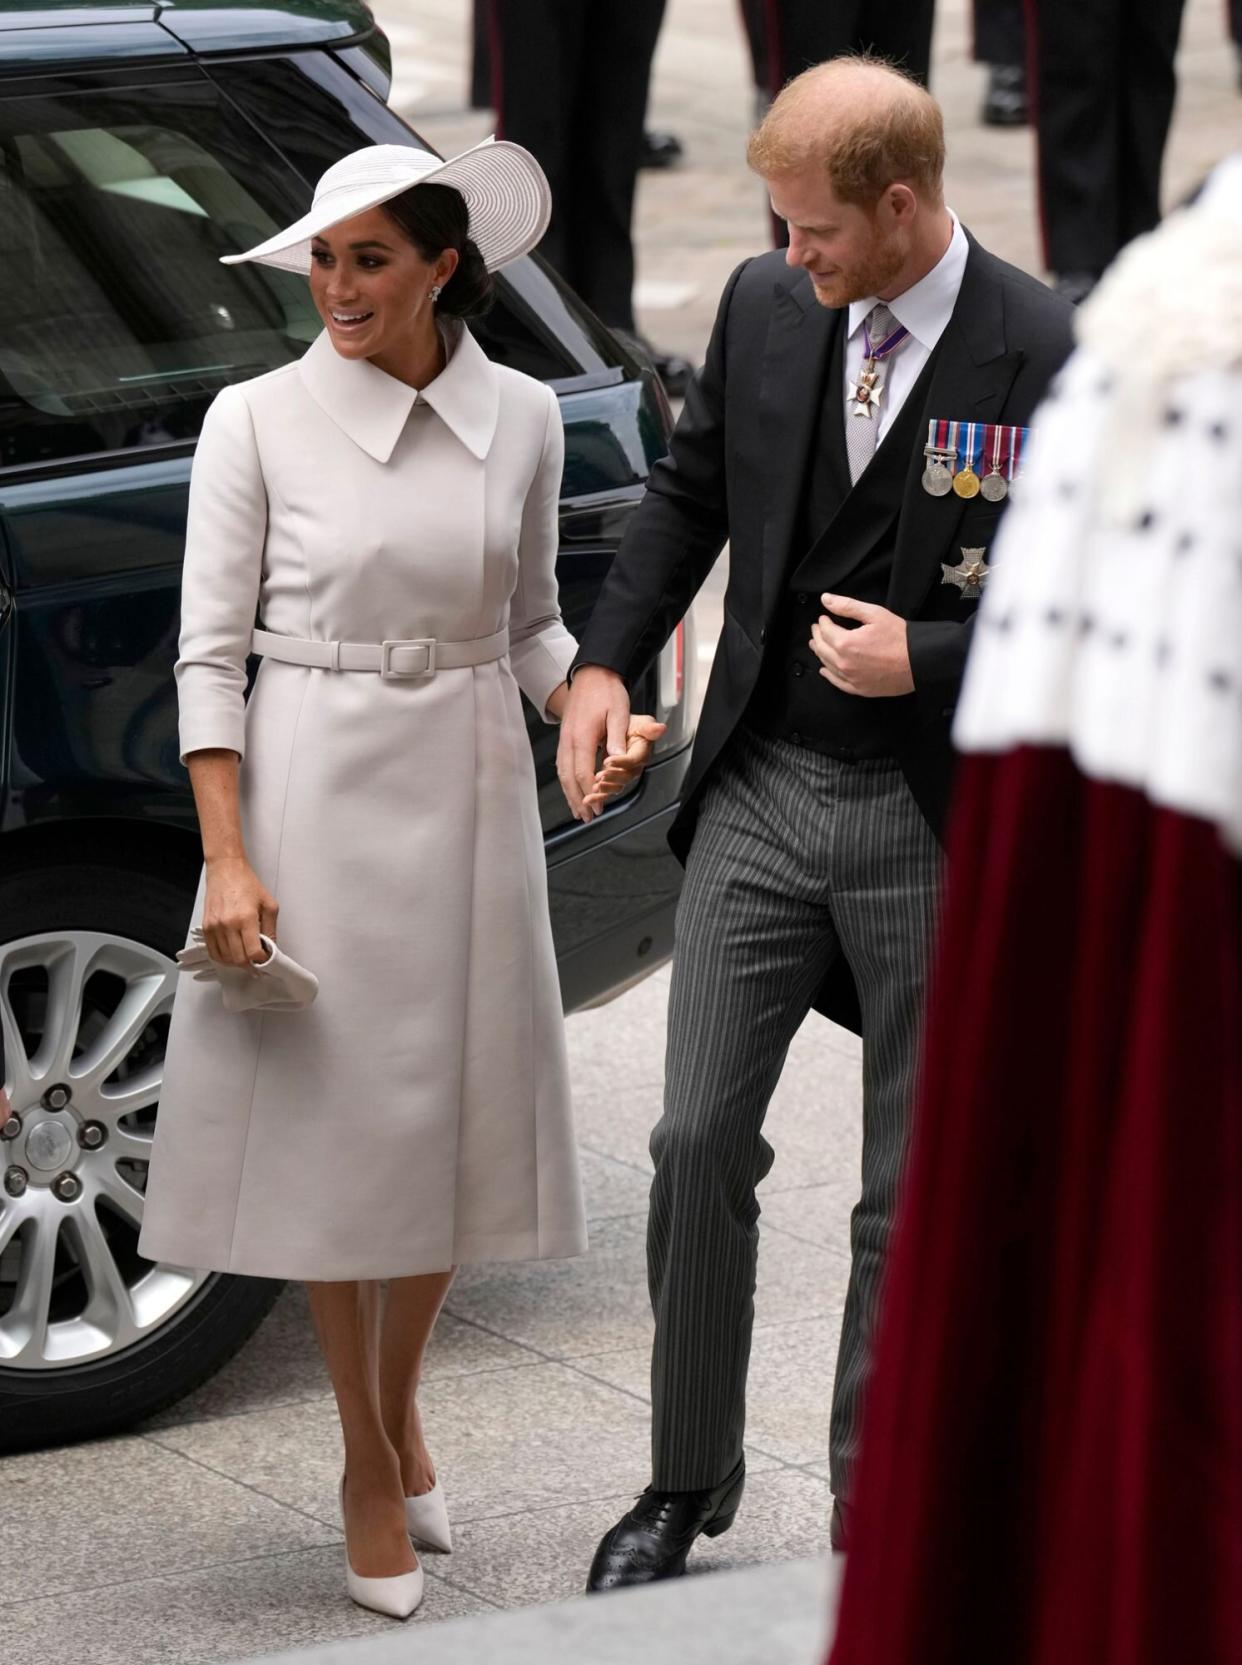 Prince Harry and Meghan Markle, Duke and Duchess of Sussex arrive for a service of thanksgiving